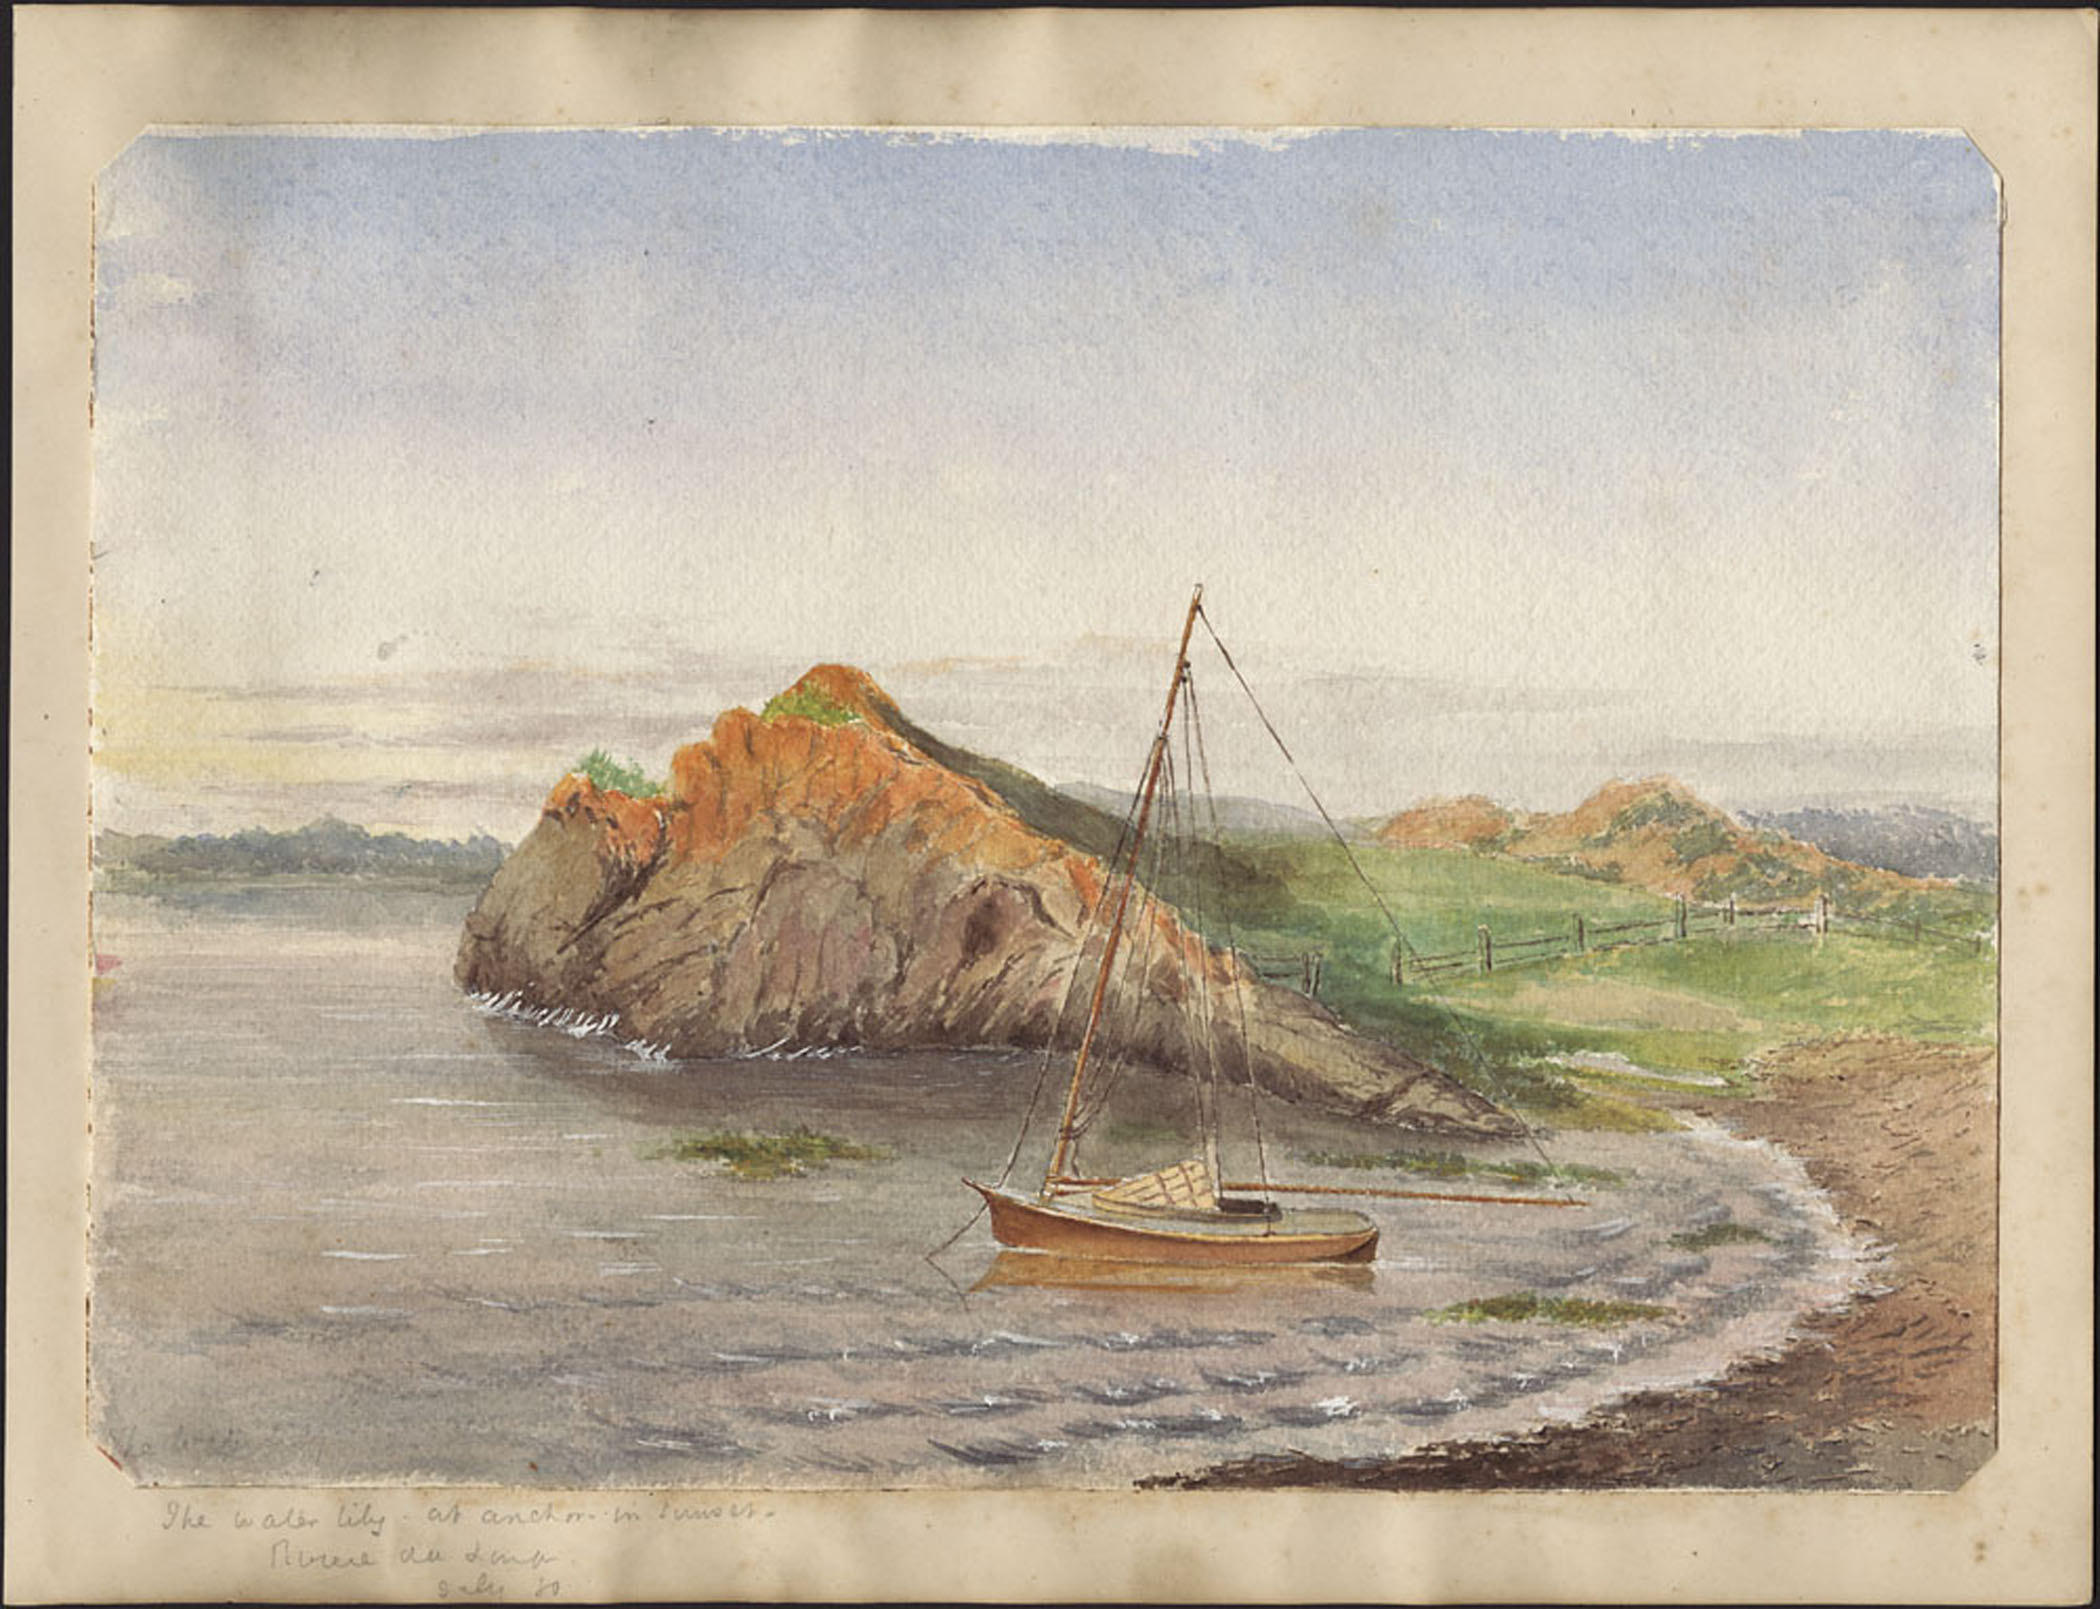 Watercolour painting of an inlet on a river, with an anchored small sailboat near the shoreline and a large rocky outcrop behind it.